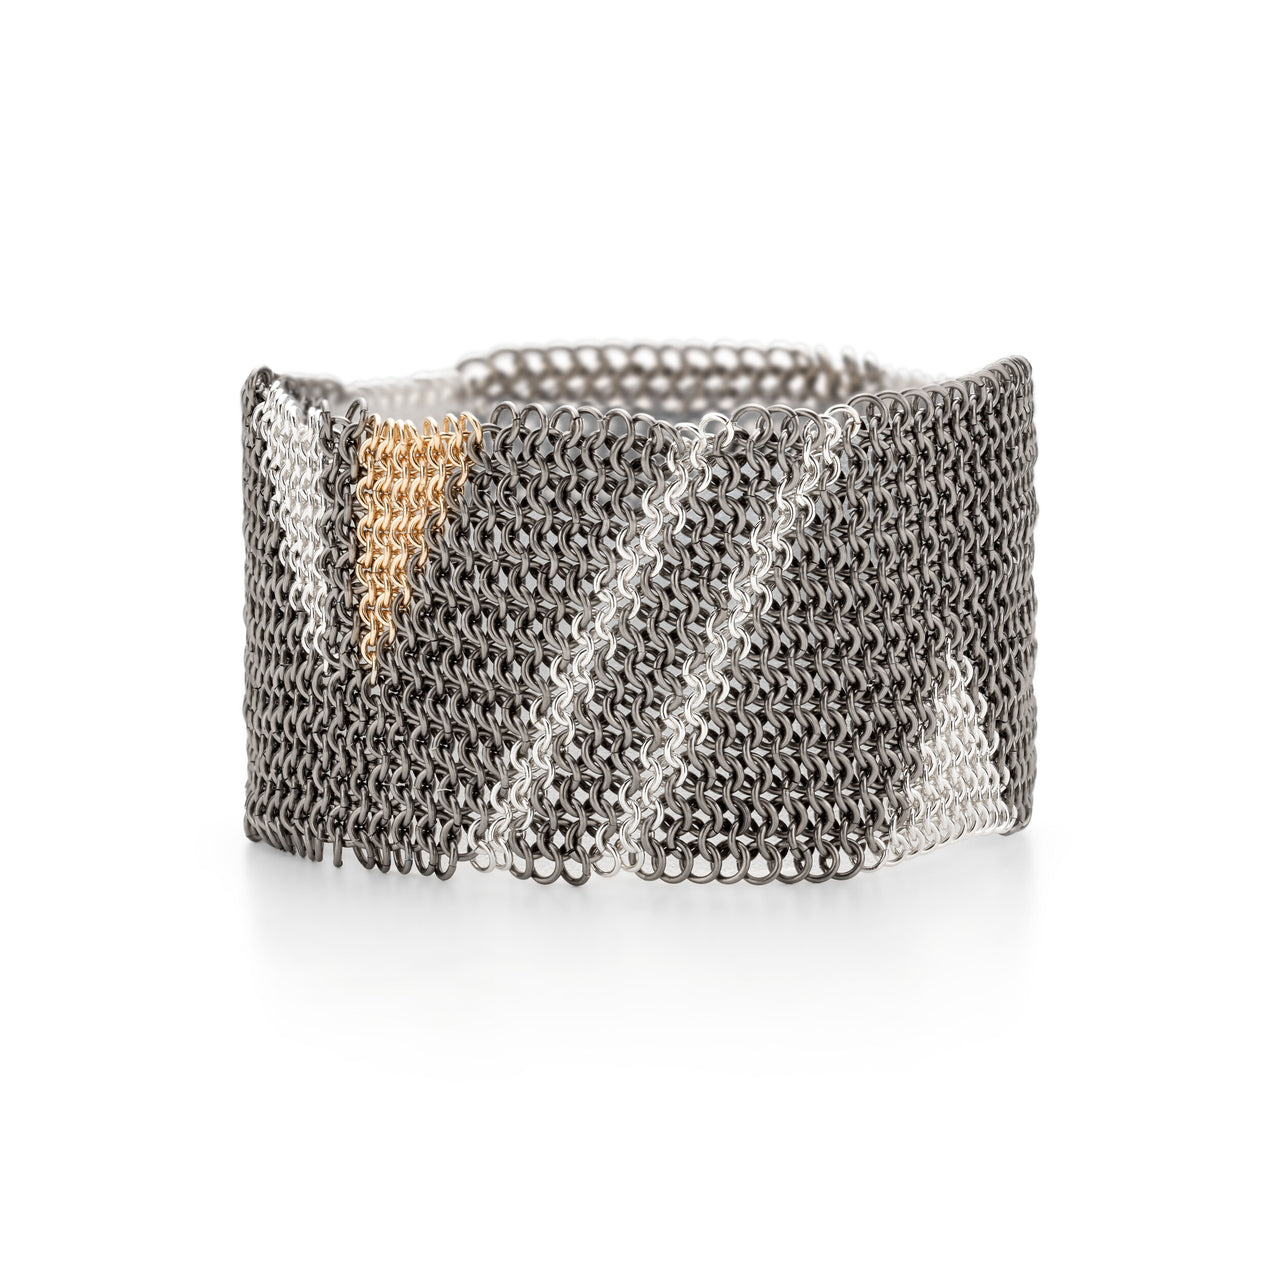 Lightning Bracelet Bangle handcrafted contemporary chainmail  jewellery titanium, 18ct recycled gold and silver geometric pattern jewelry tactile chains by Corrinne Eira Evans